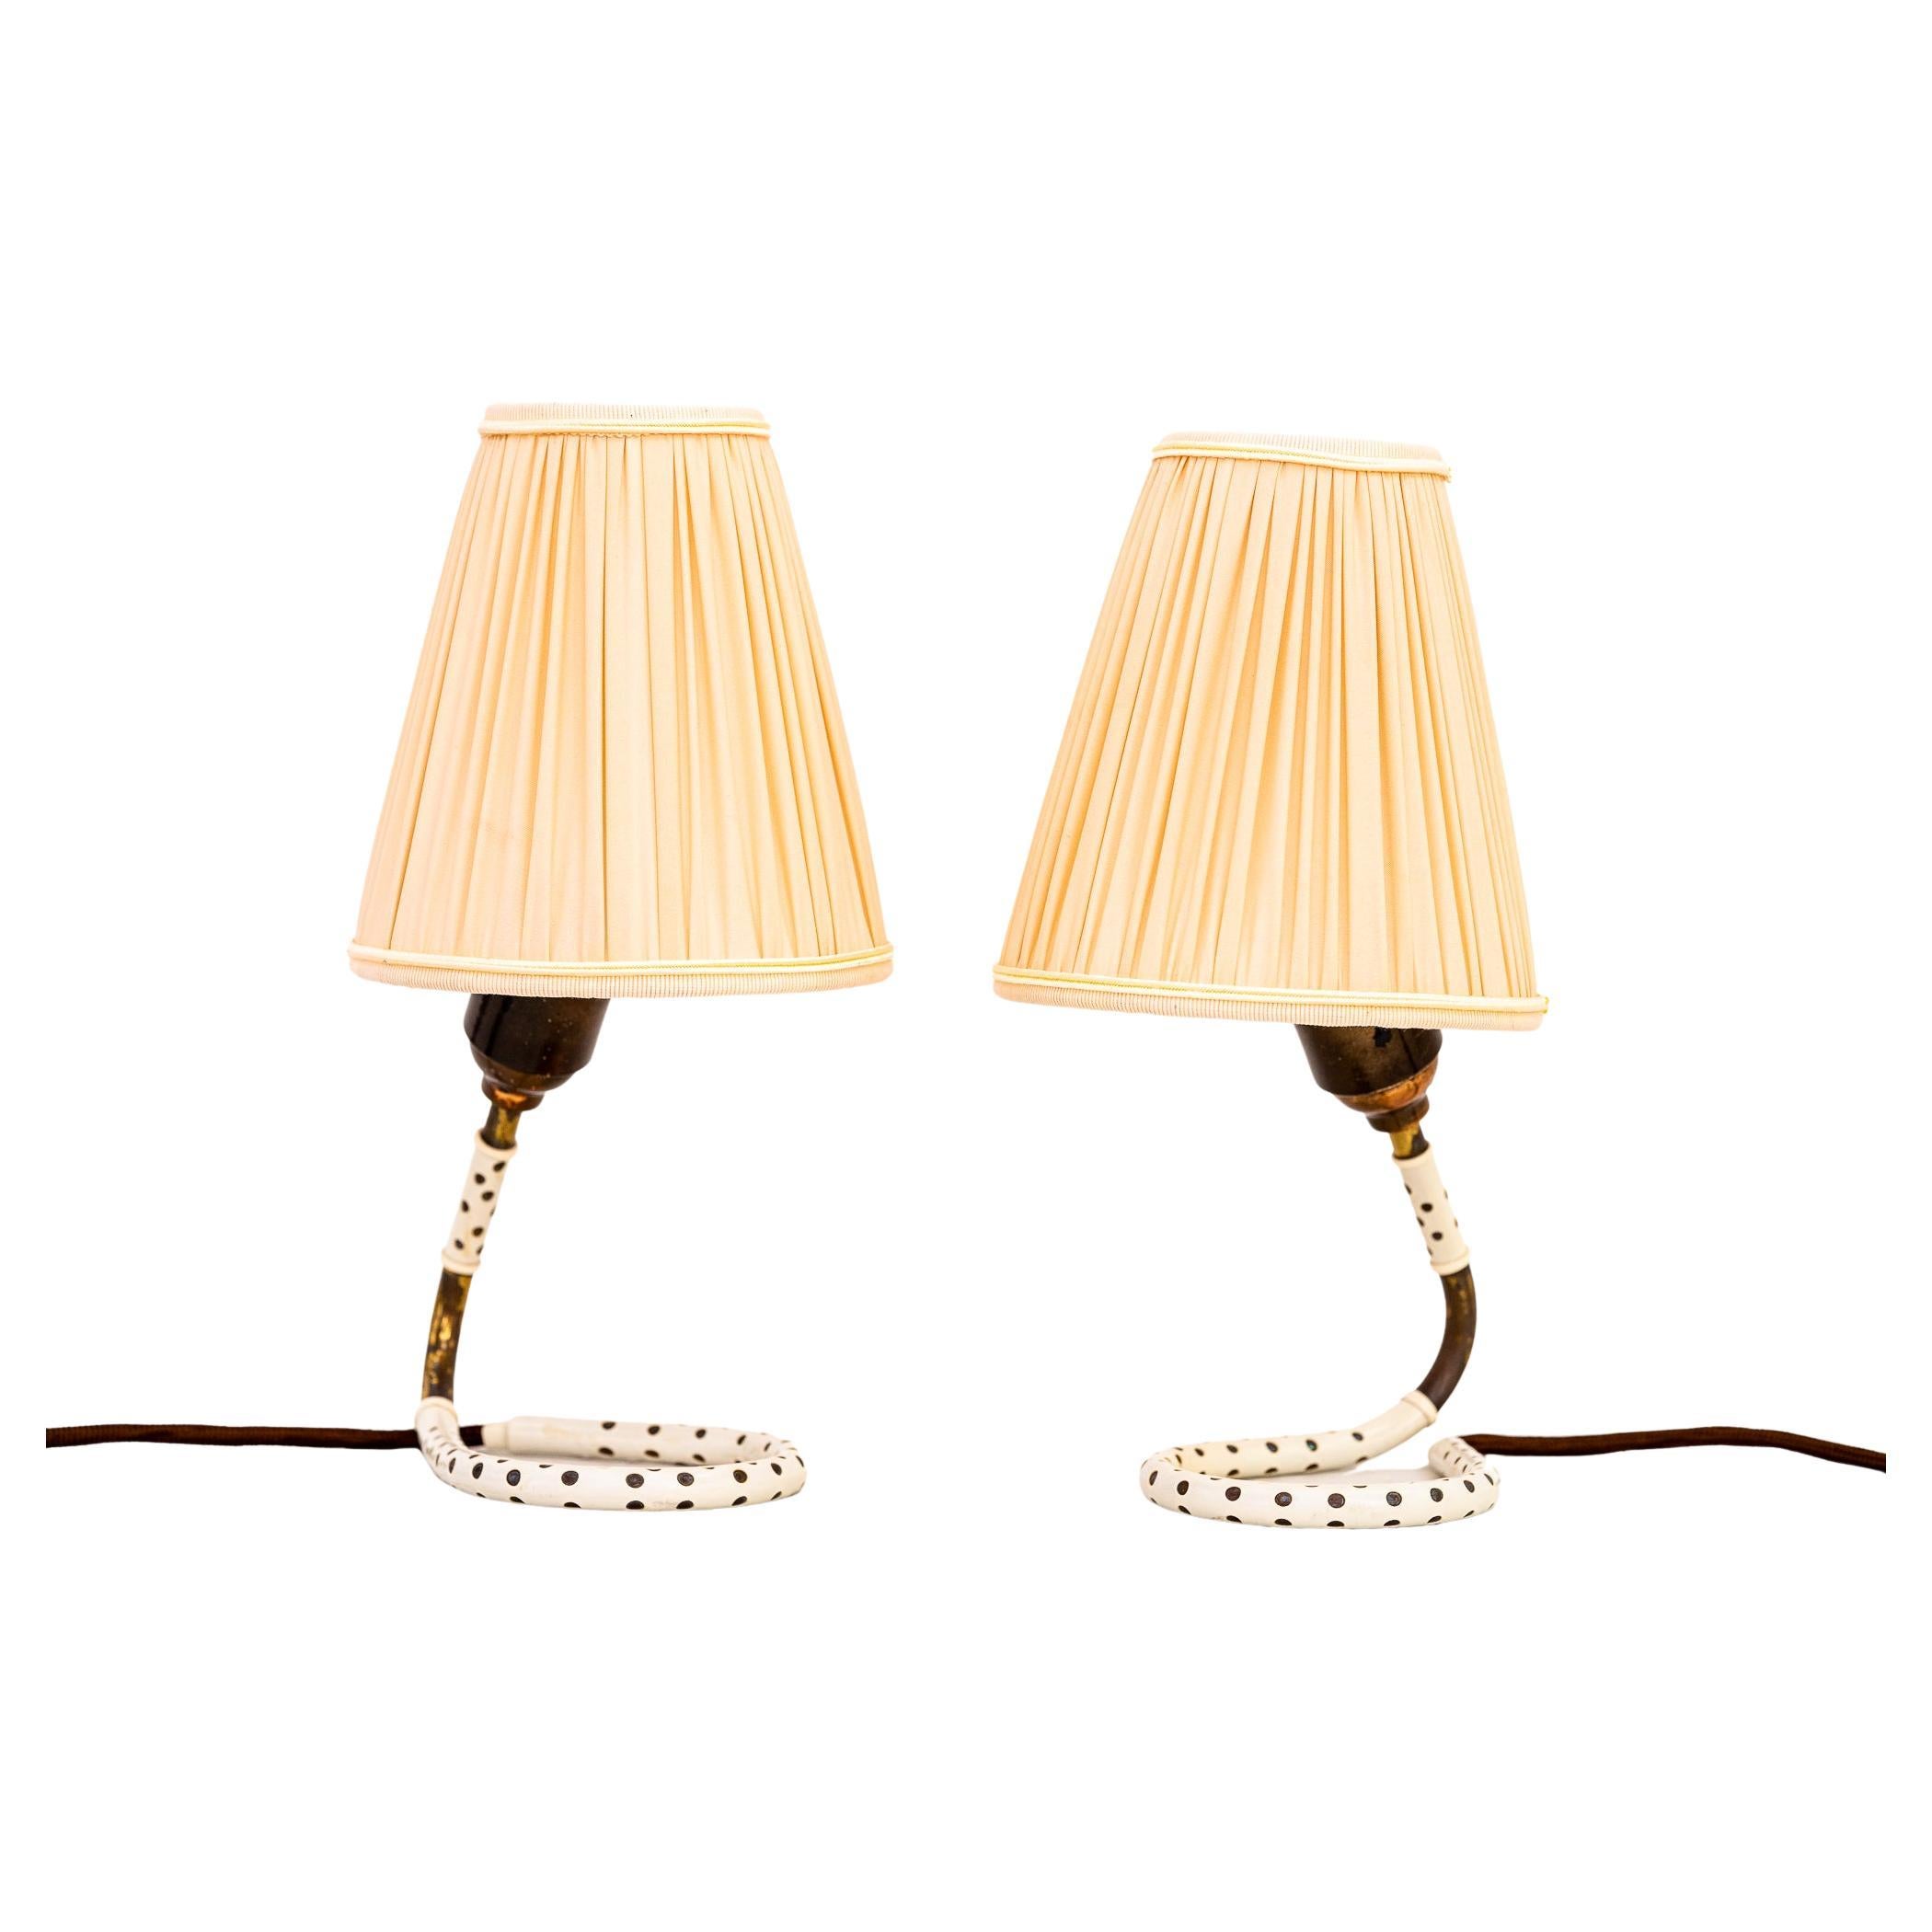 2 Rupert Nikoll Table Lamps Vienna around 1960s with Fabric Shades